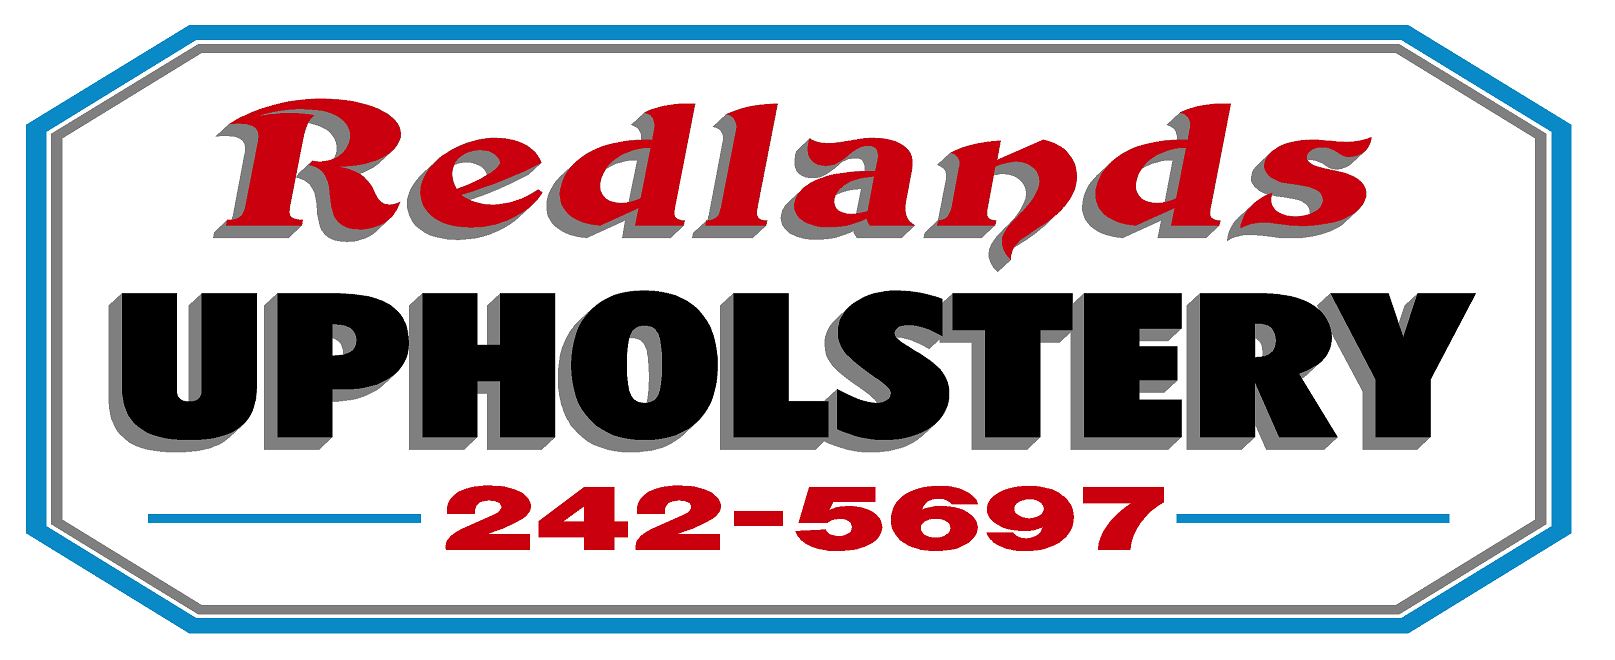 Redlands Upholstery Logo Jpep From Bud Signs